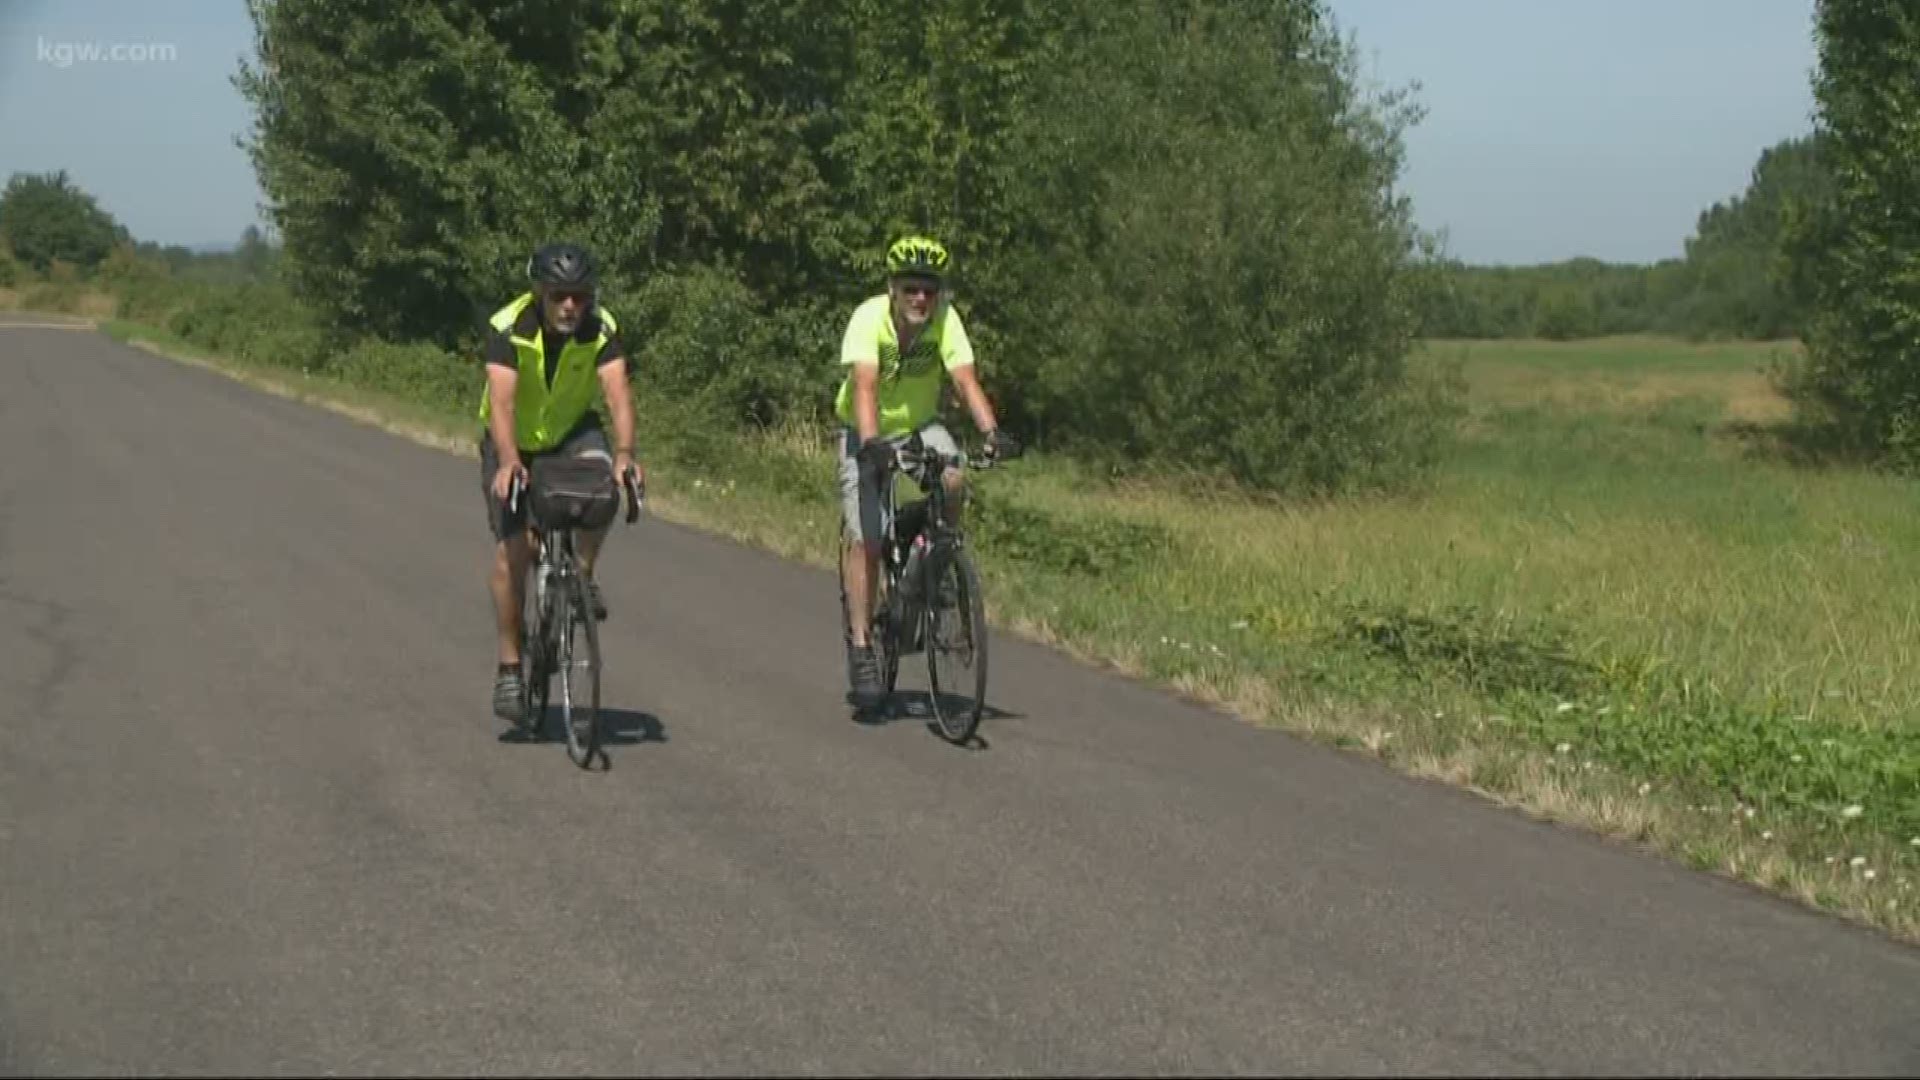 Vancouver man pedaling Route 66 for homeless fundraiser hit by truck